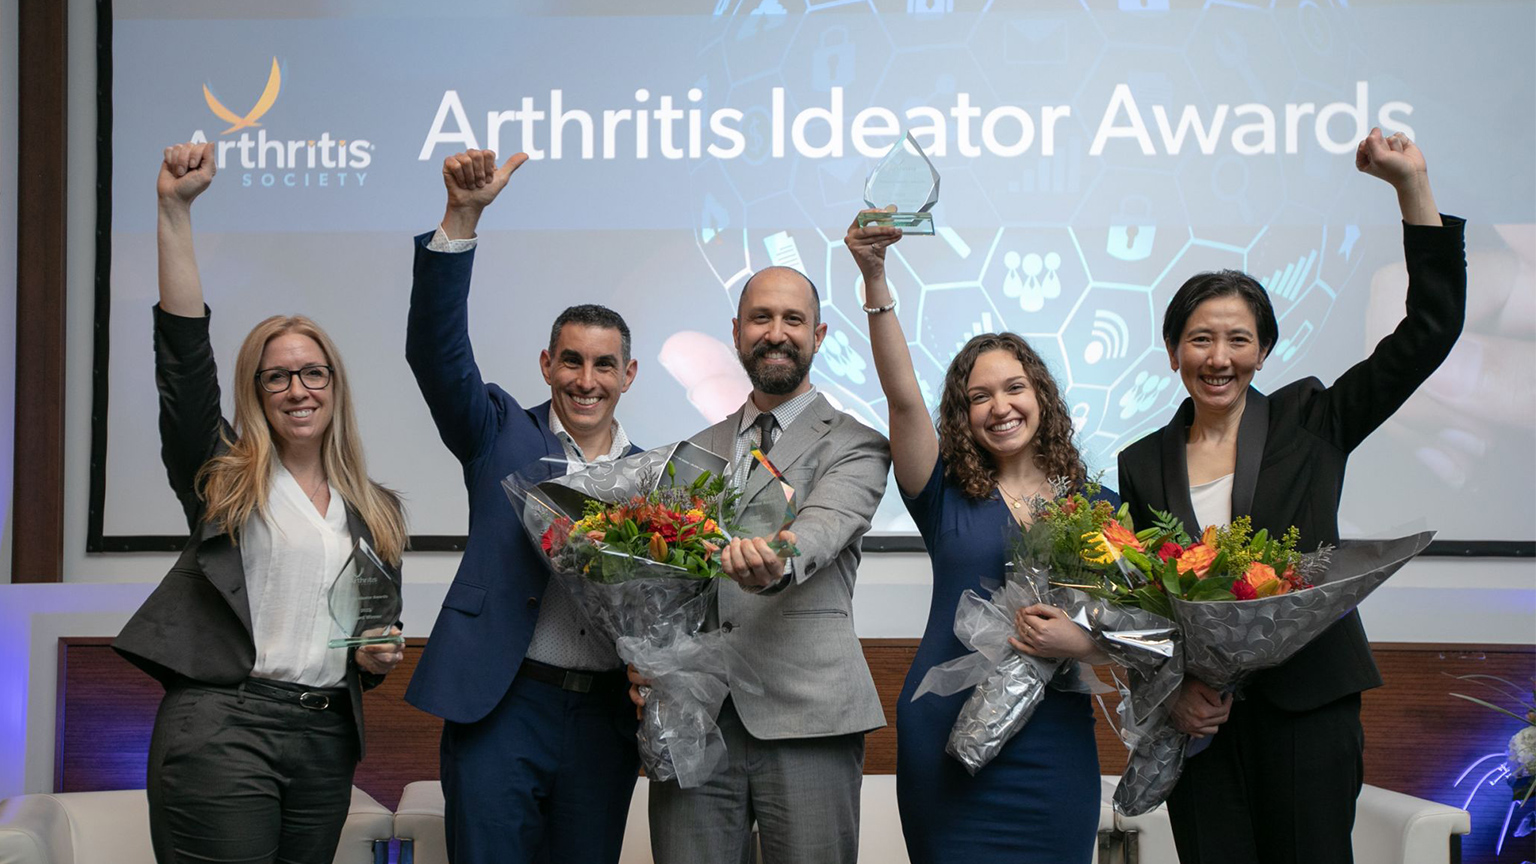 Winners of the Arthritis Ideator Awards hold their arms up